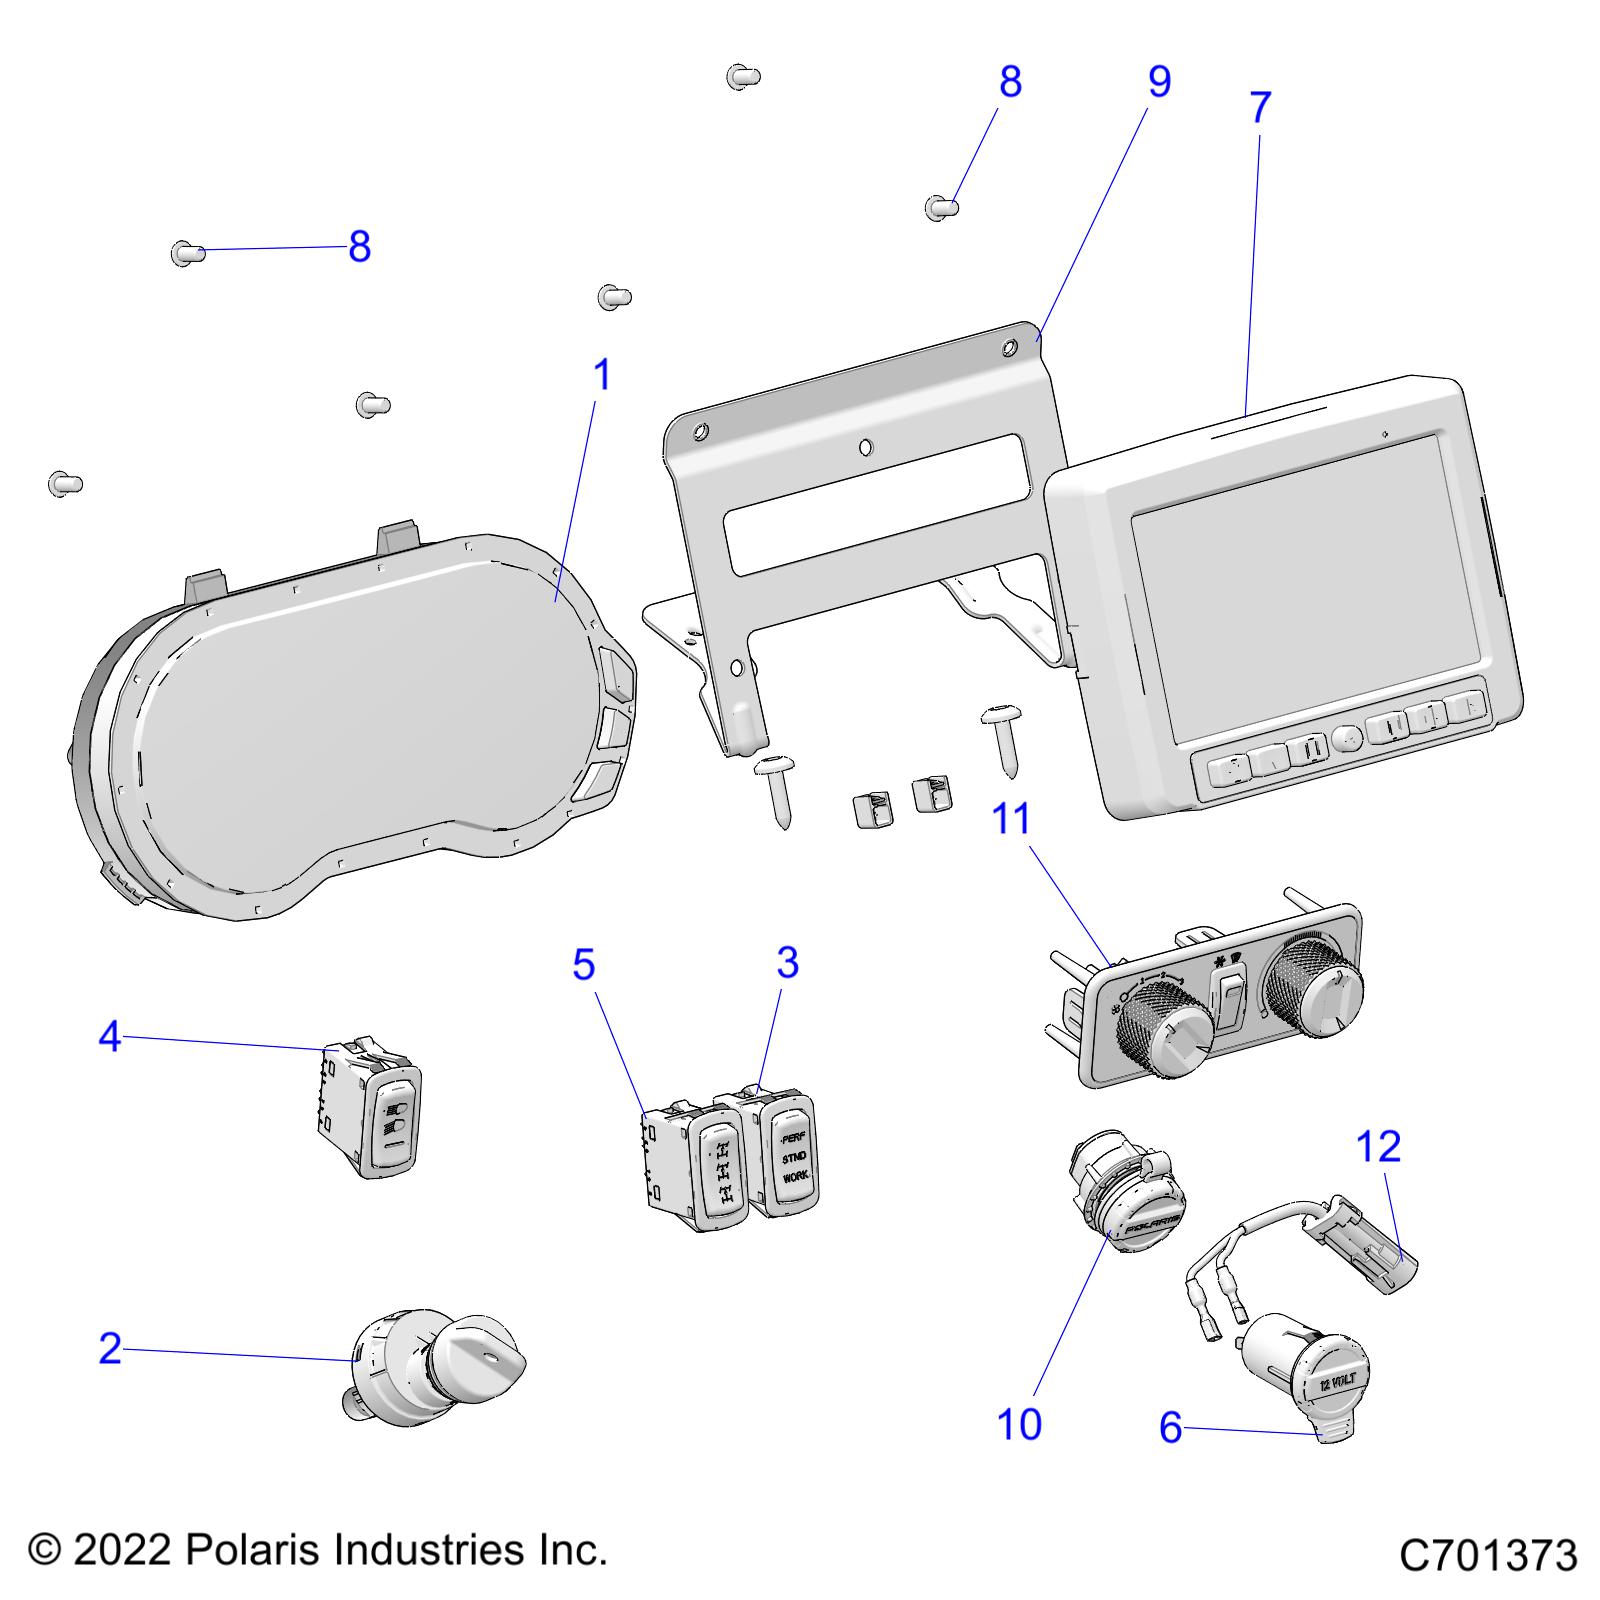 Part Number : 2416418 HARNESS USB